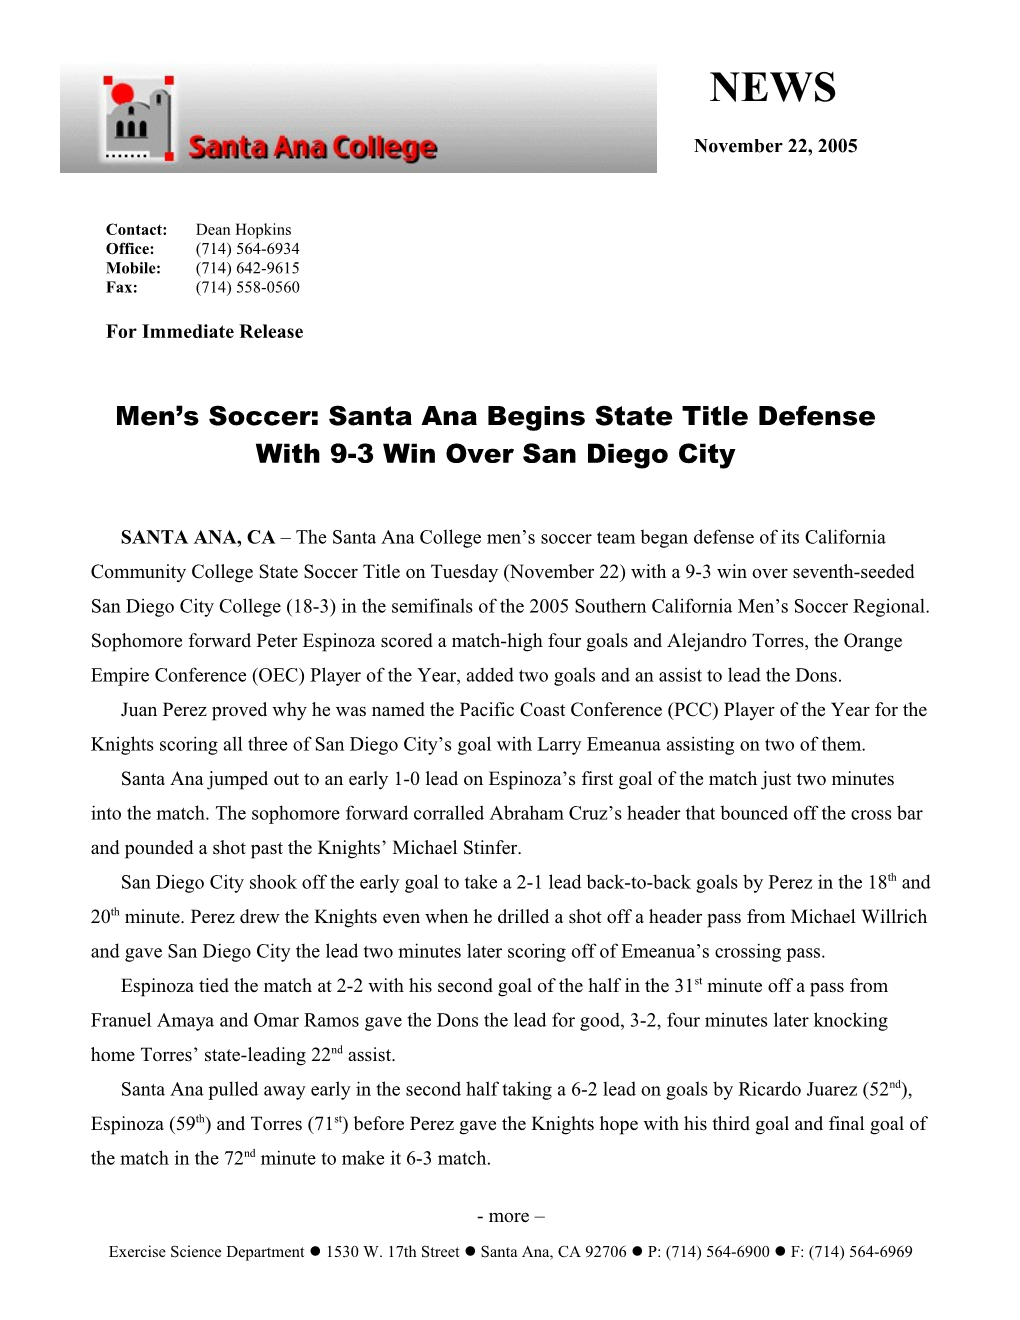 Men S Soccer: Santa Ana Begins State Title Defense with 9-3 Win Over San Diego City